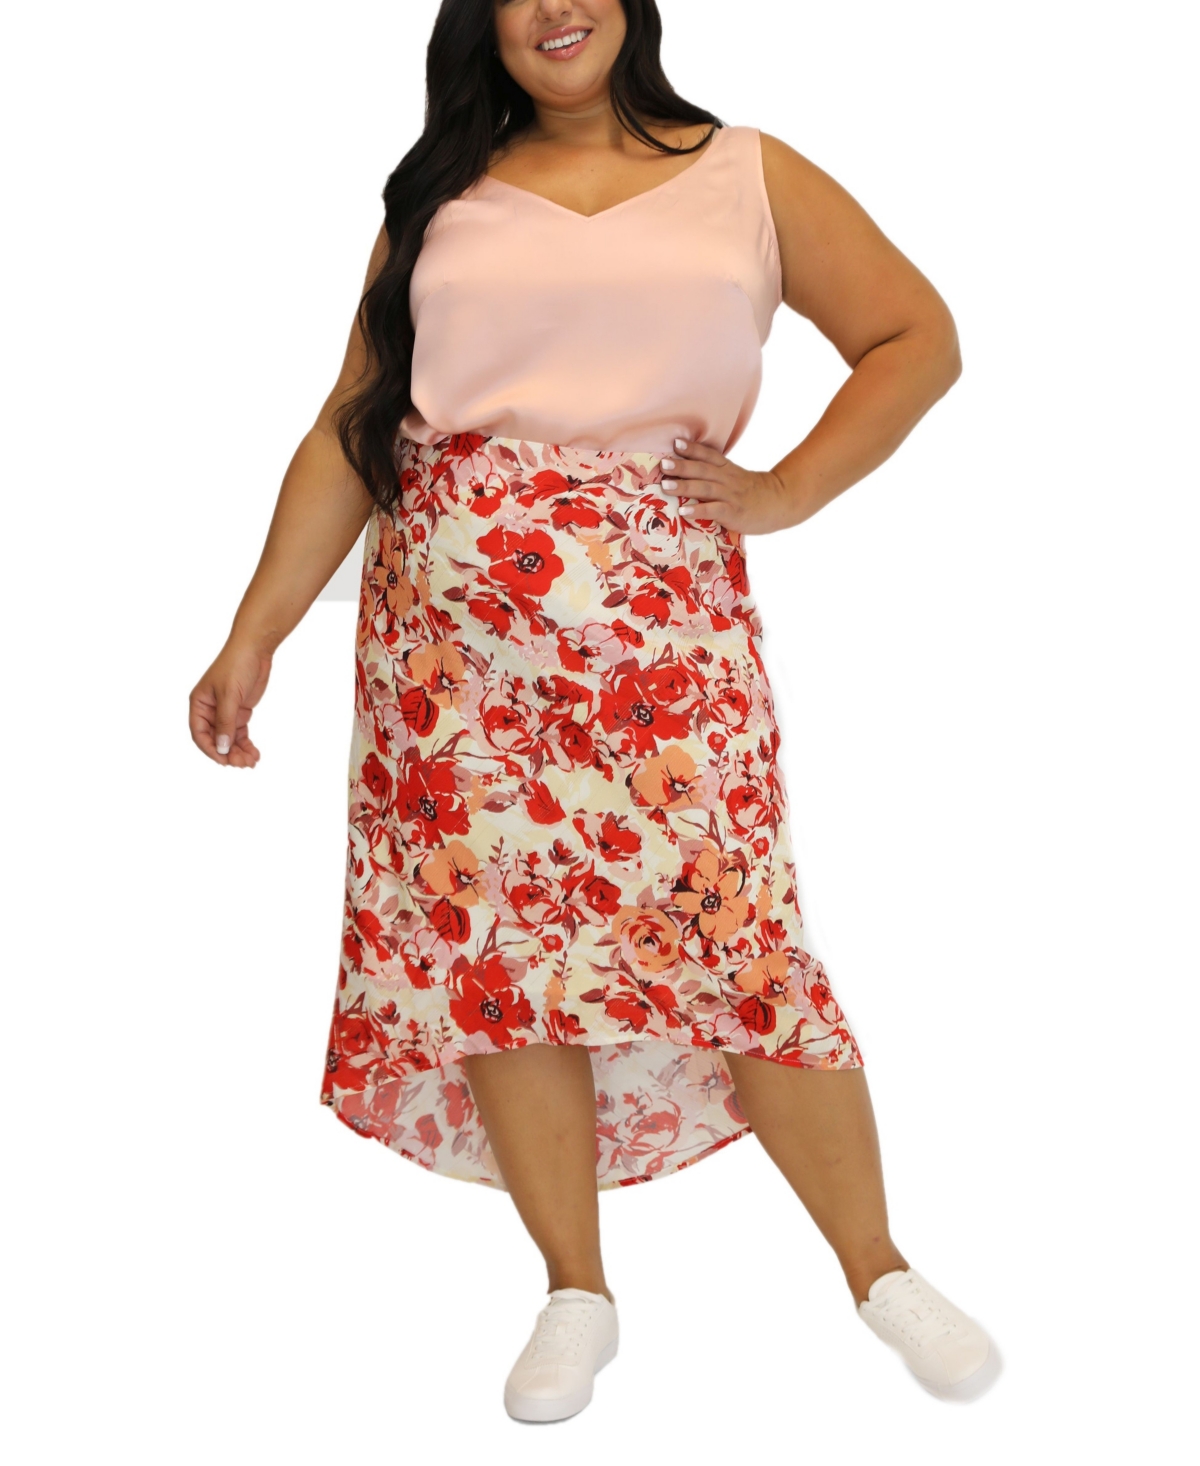 Maree Pour Toi Women's Plus Size Floral Printed High Low Skirt